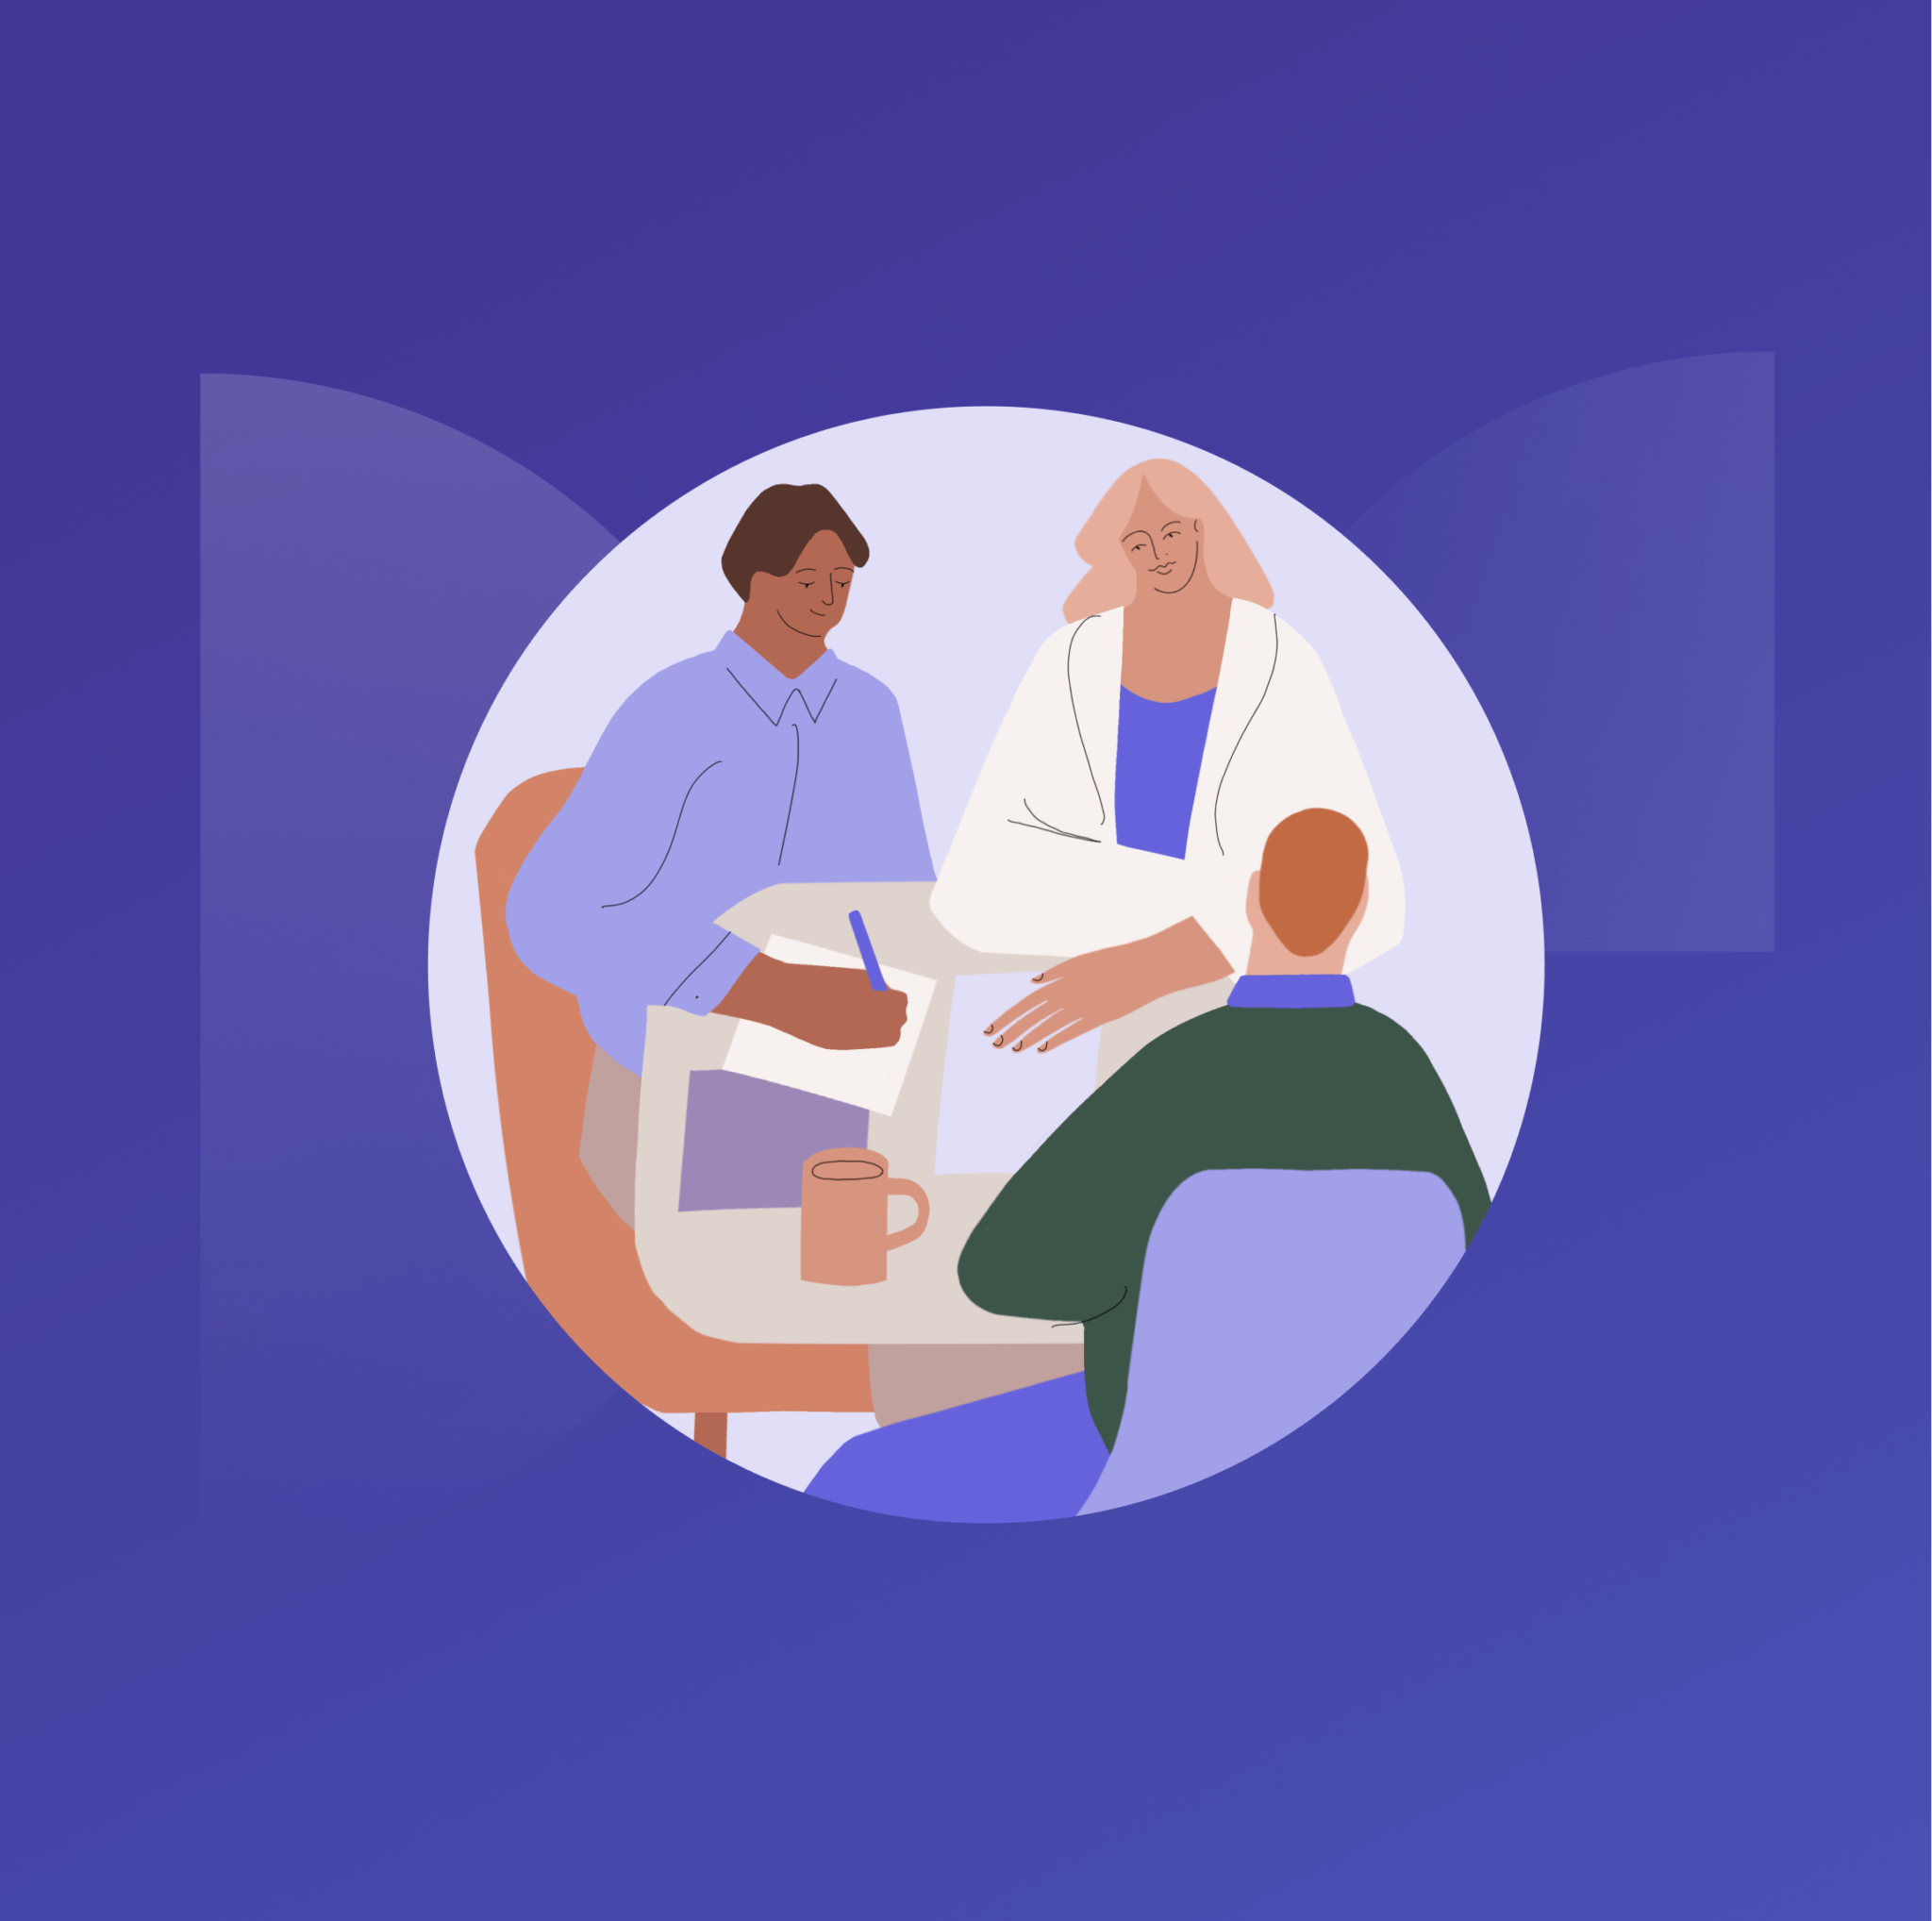 A design element from Geode Health. There is a stock illustration of a physician and two people together at a table.